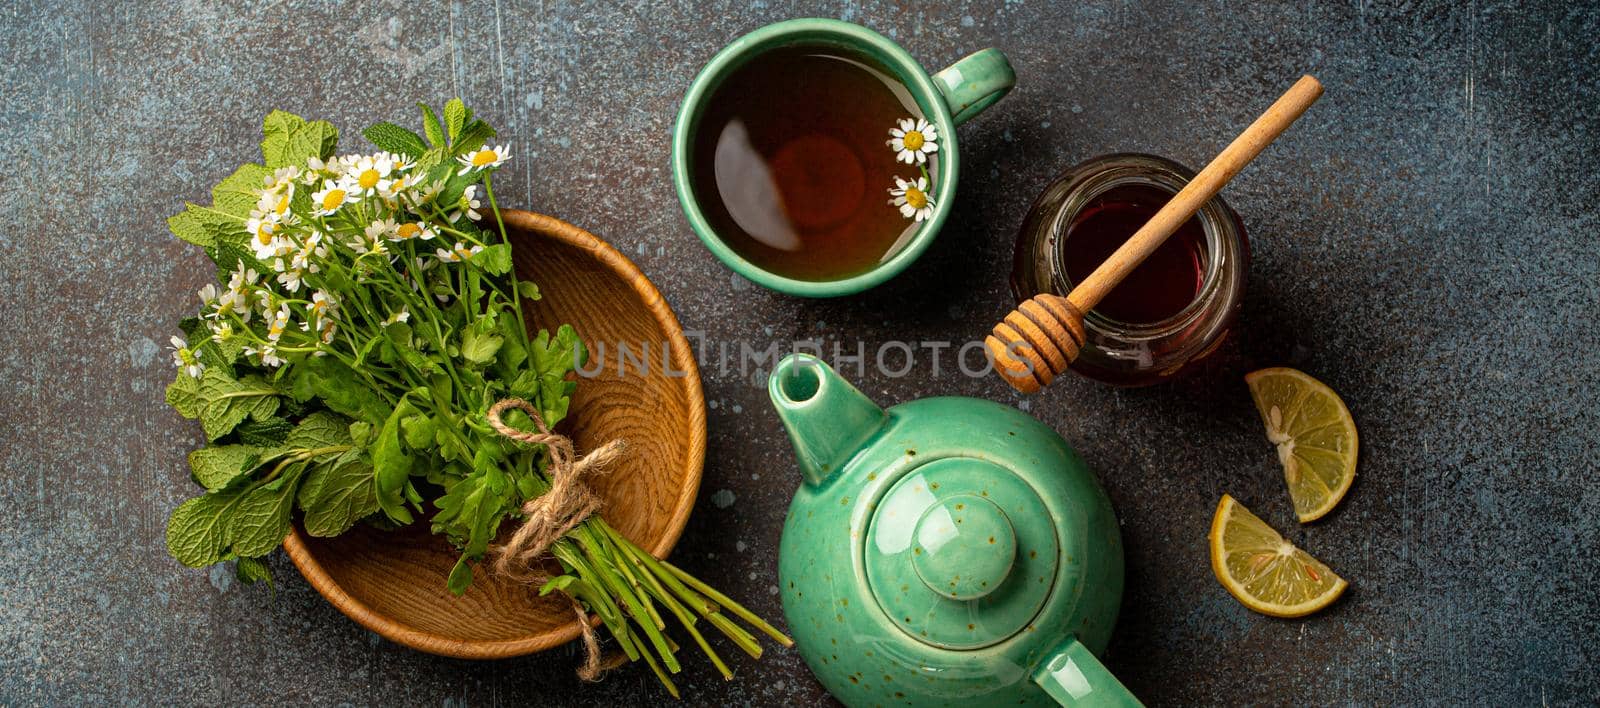 Herbal tea with camomile, fresh medical herbs and flowers, tea cup, tea pot, jar of honey, lemon top view on stone background, herbal alternative medicine and homeopathy remedy concept